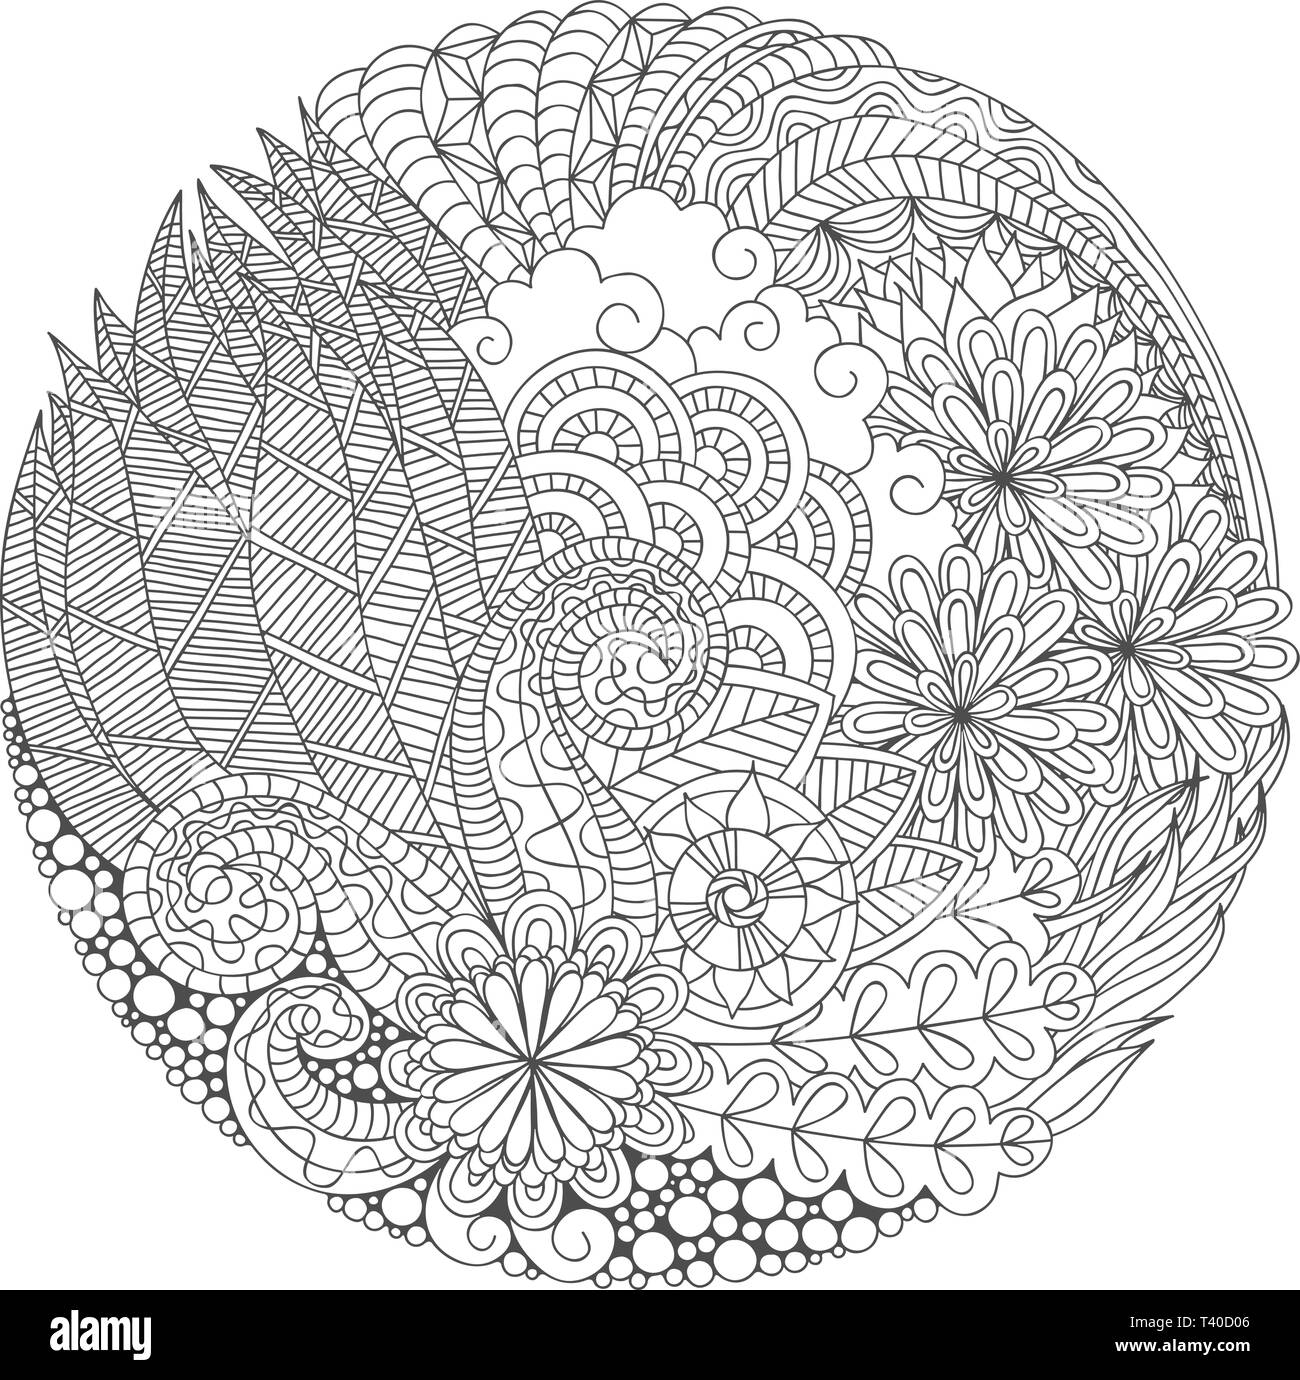 Mandalas Adult Coloring Book for Relaxation with Anti-Stress Nature Patterns